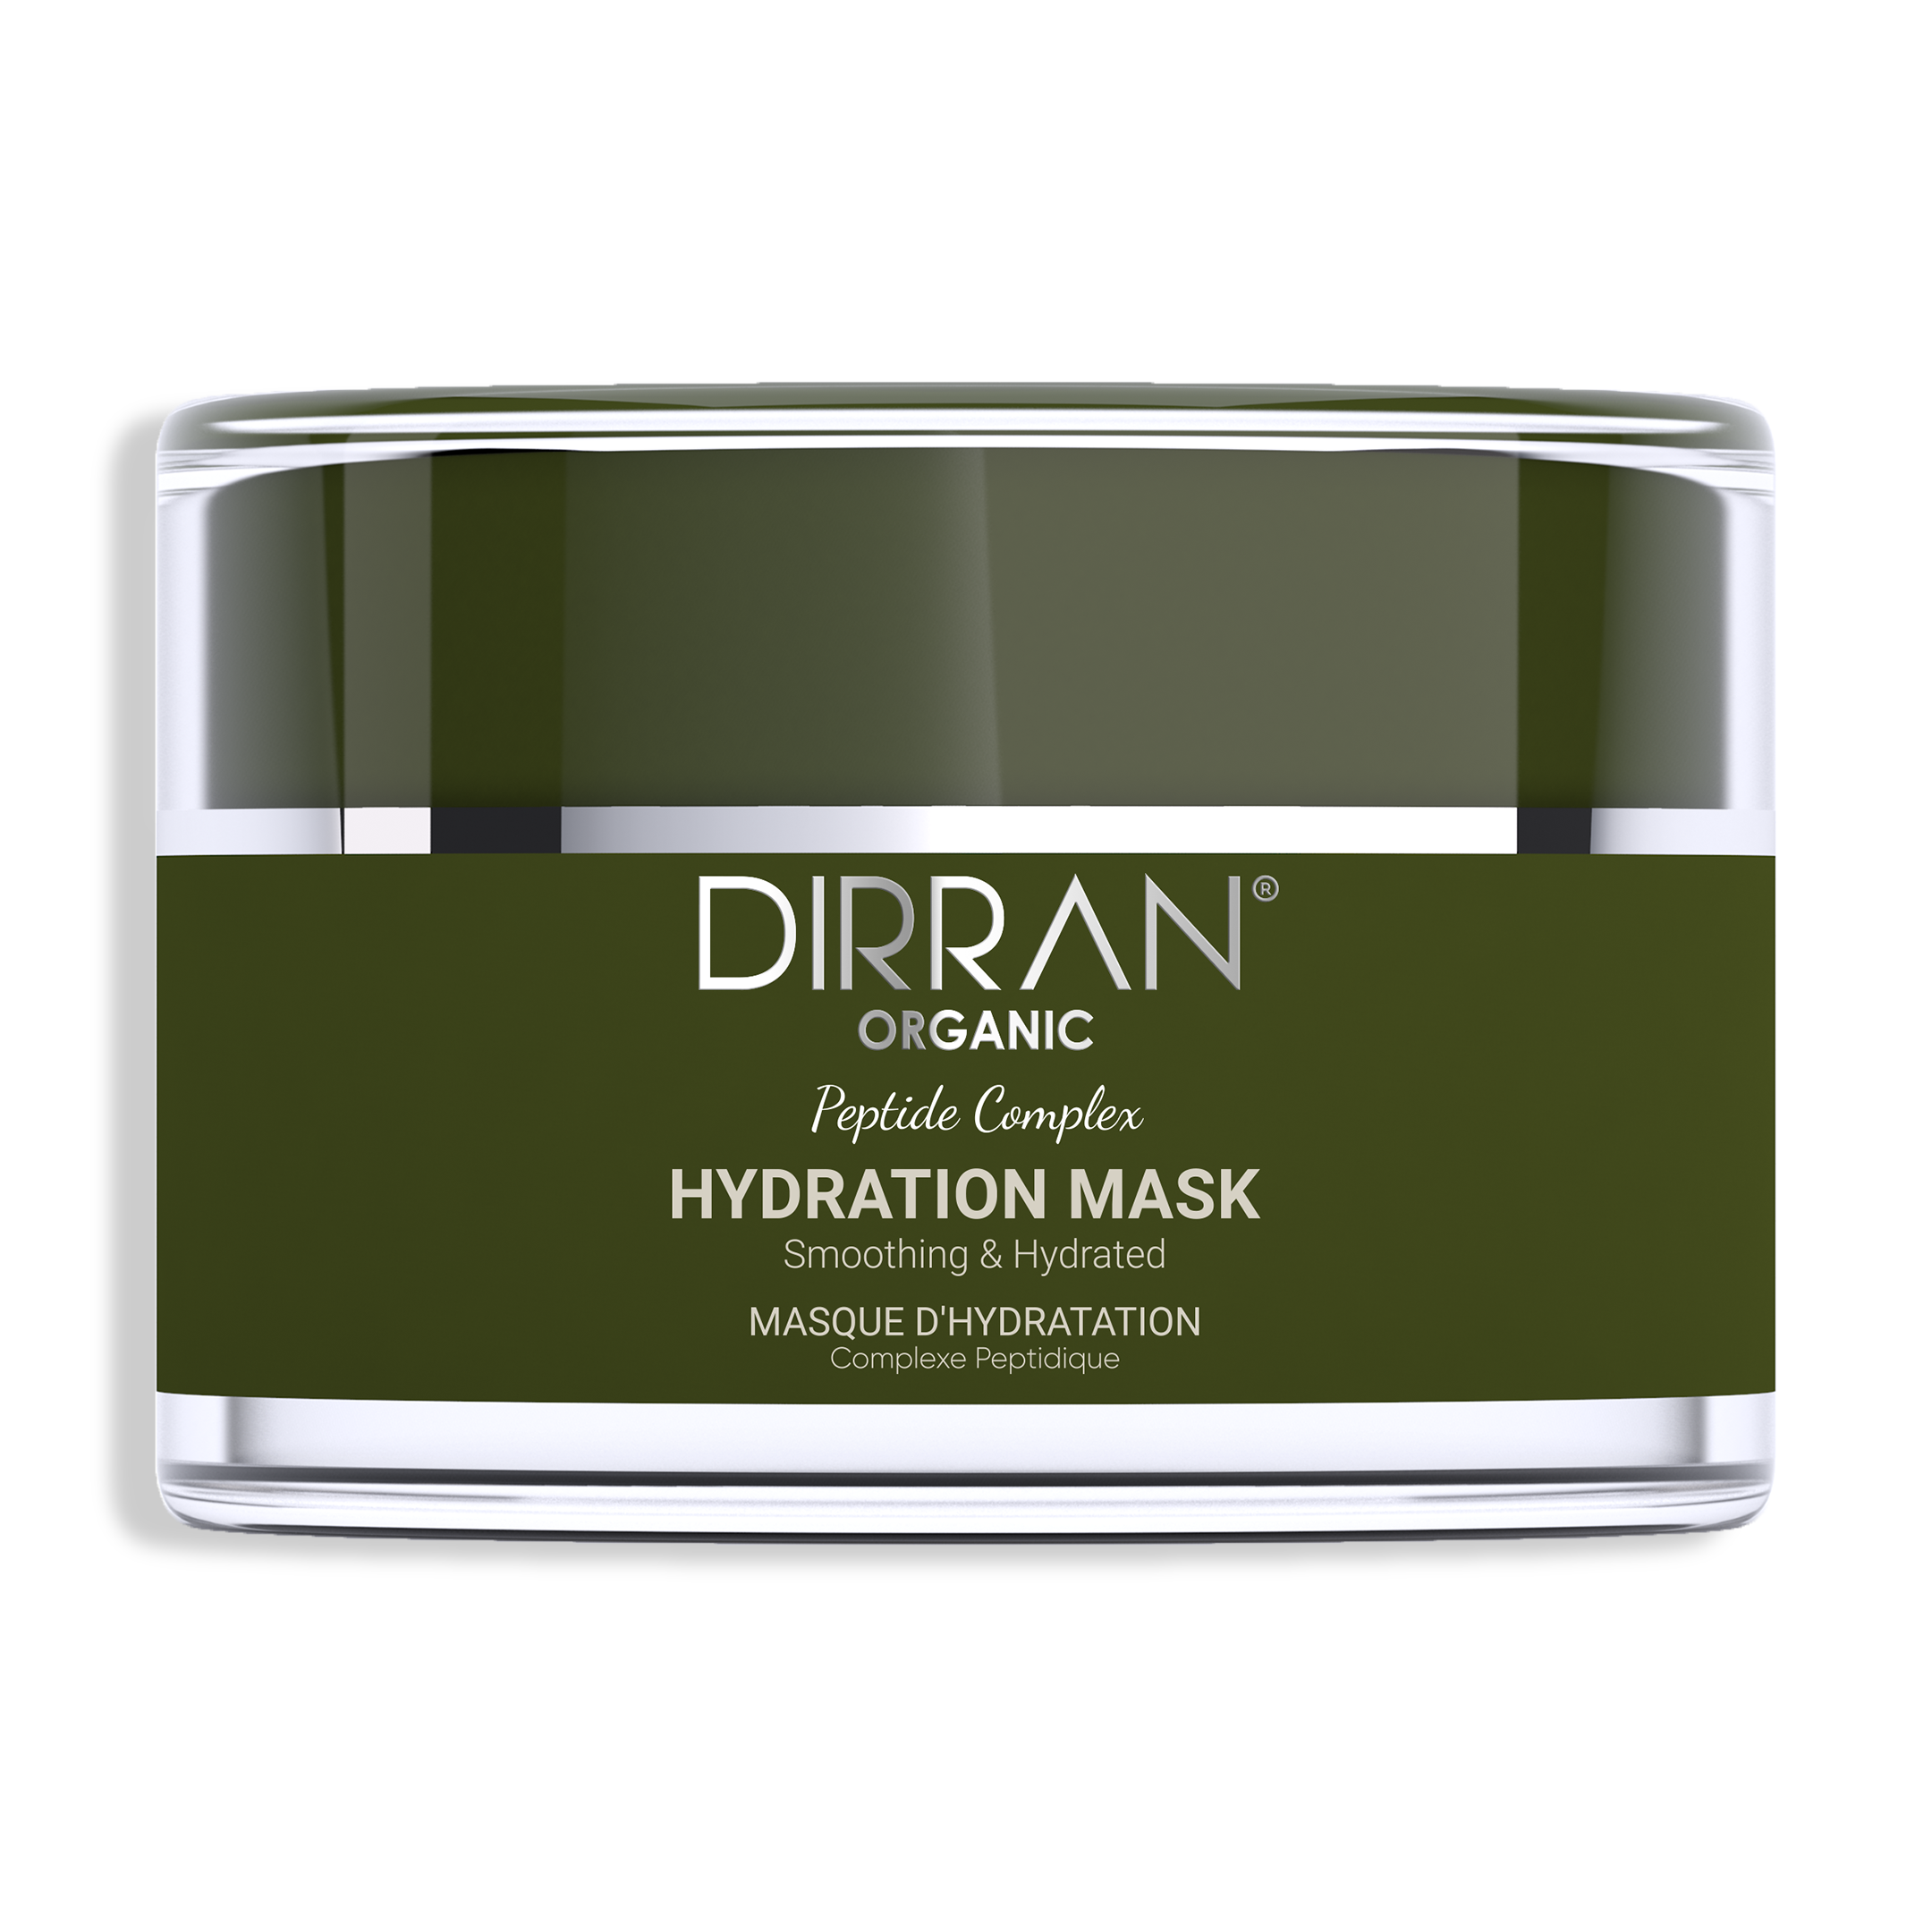 HYDRATION MASK Peptide Complex for Smoothing and Hydrated